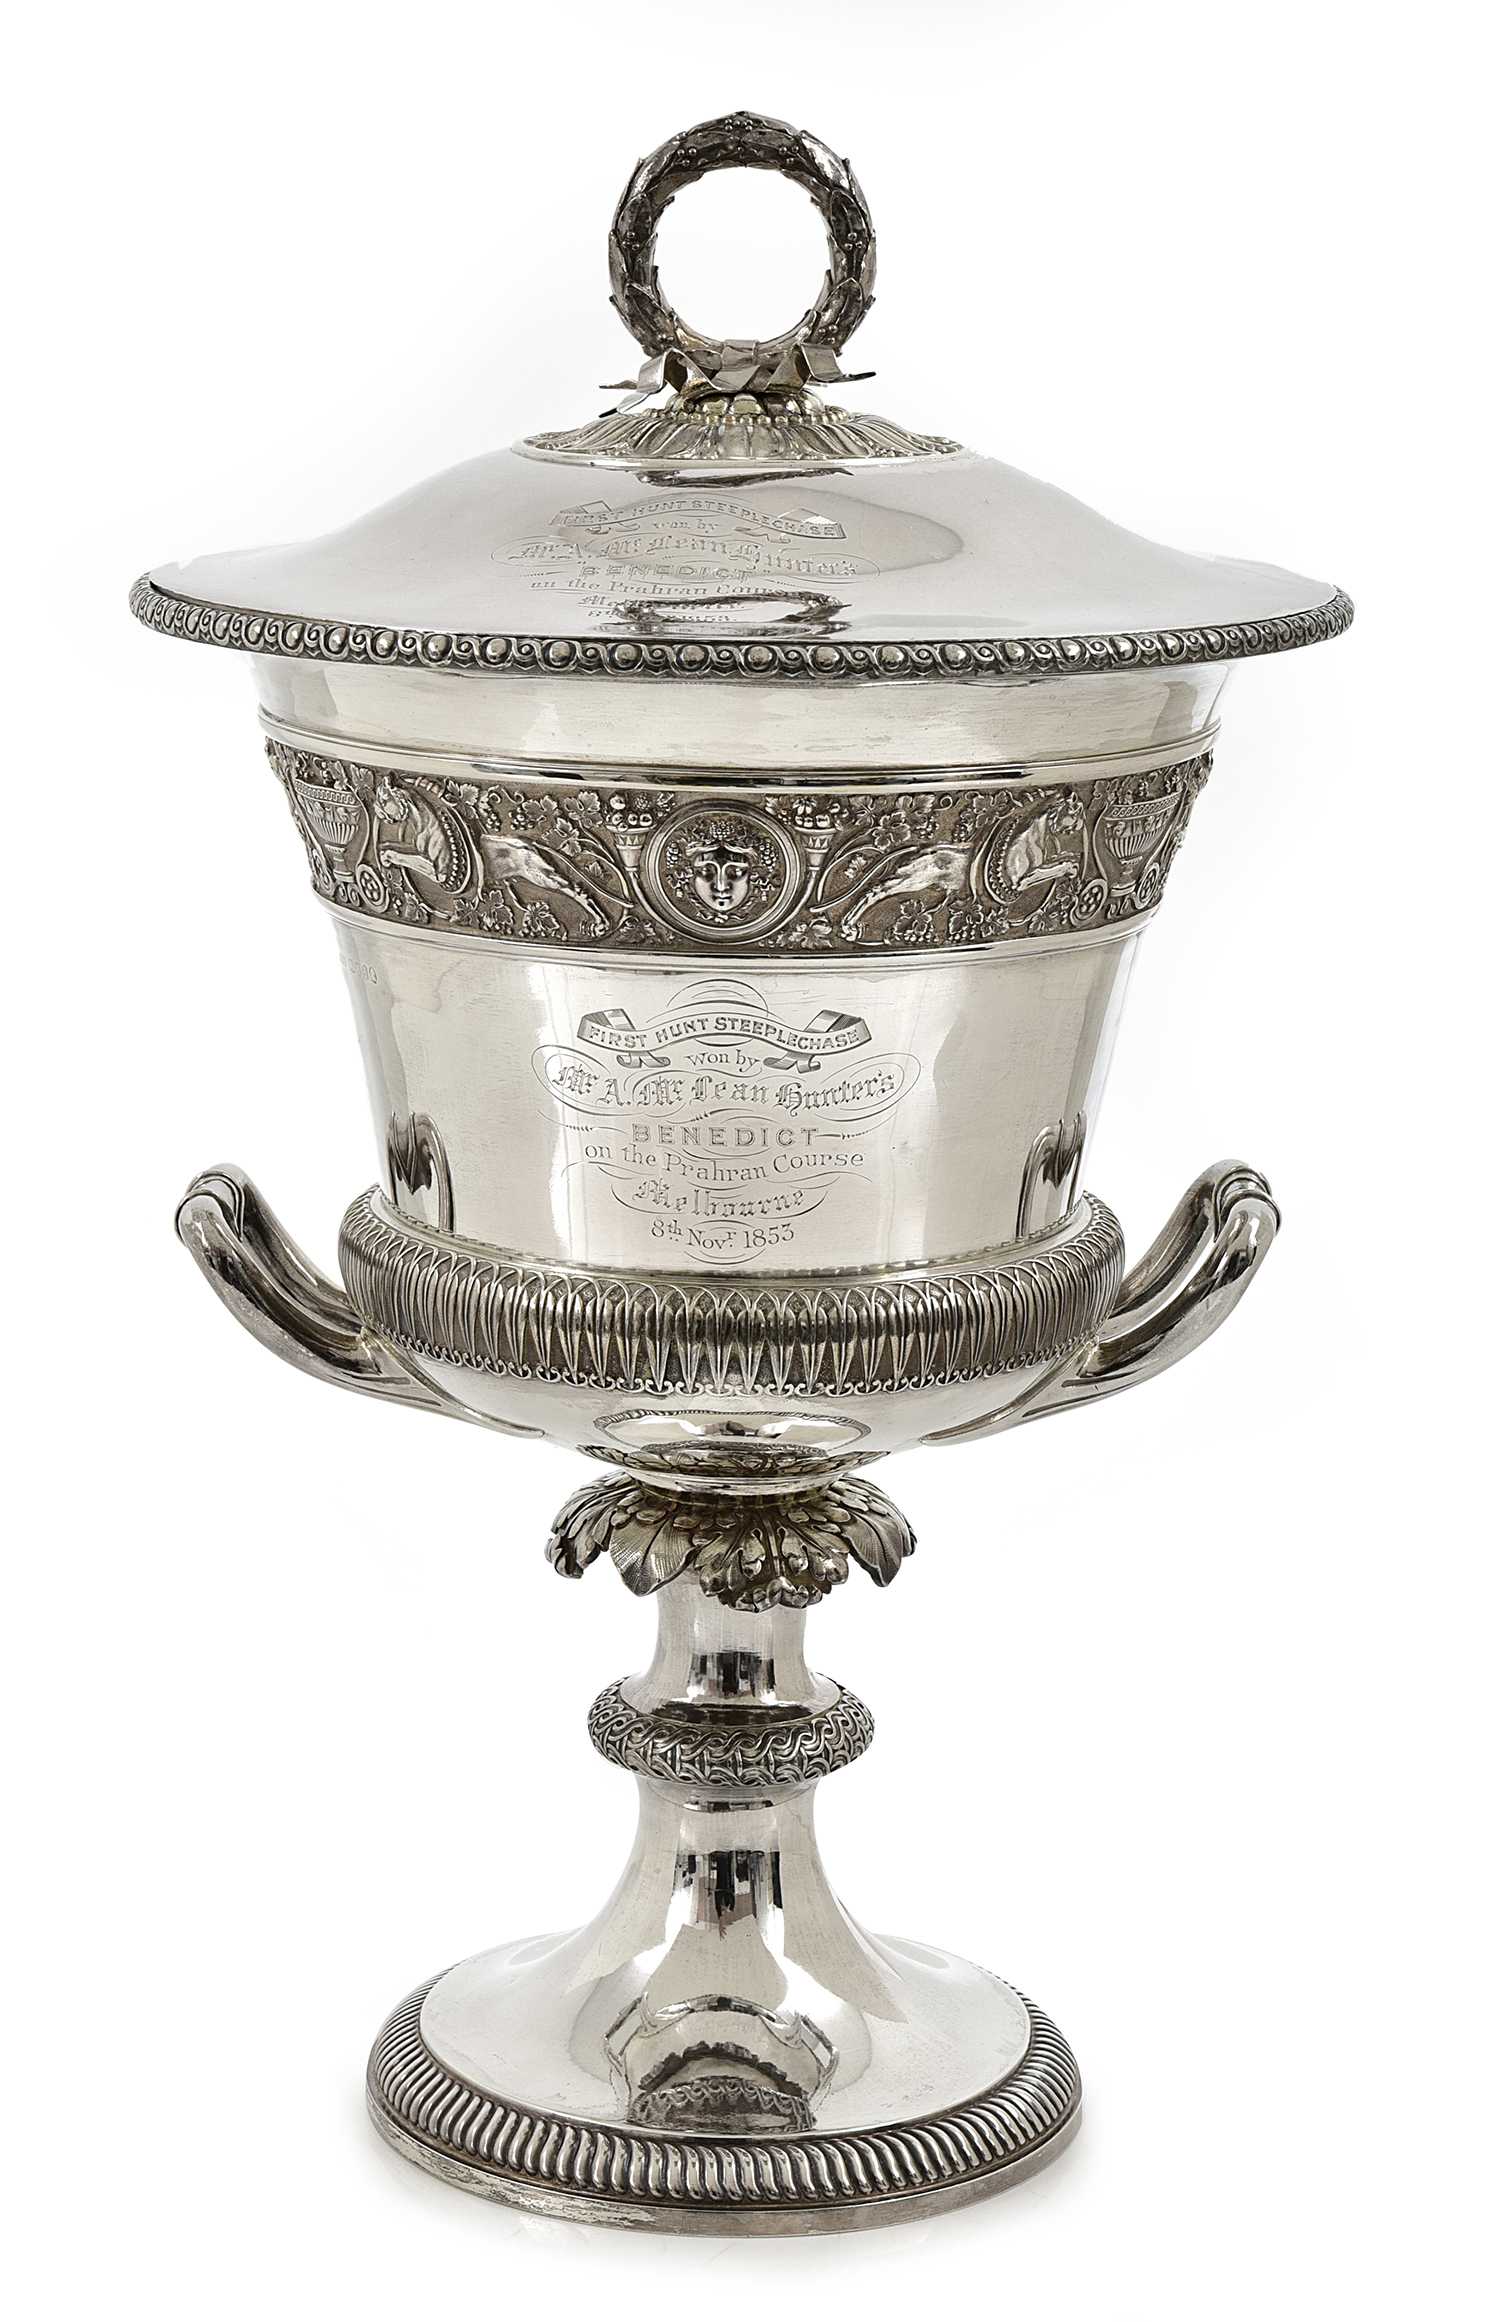 The 1853 “First Hunt Steeplechase Trophy” will be offered for auction for the first time in 163 by Leonard Joel on 15 May. The sale will take place only a few blocks from where the trophy was originally presented – the former Prahran Course located in the precinct between what is now Toorak Road and Fawkner Park in Melbourne’s South Yarra.